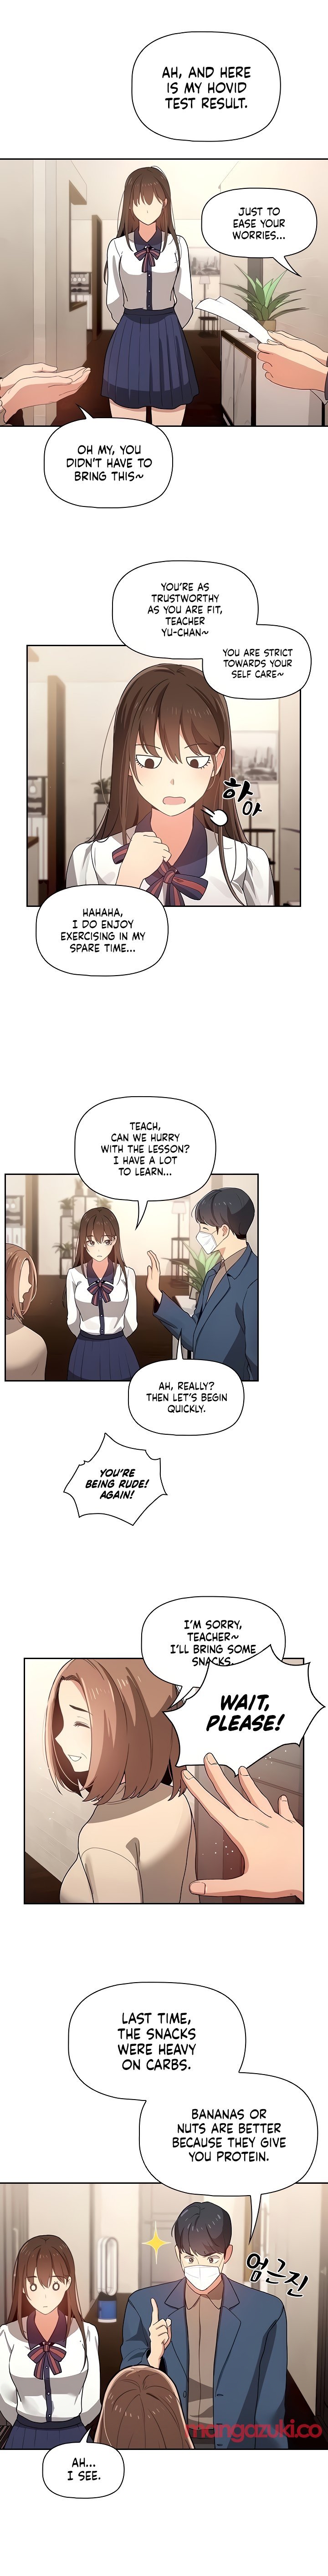 private-tutoring-in-these-difficult-times-chap-3-4